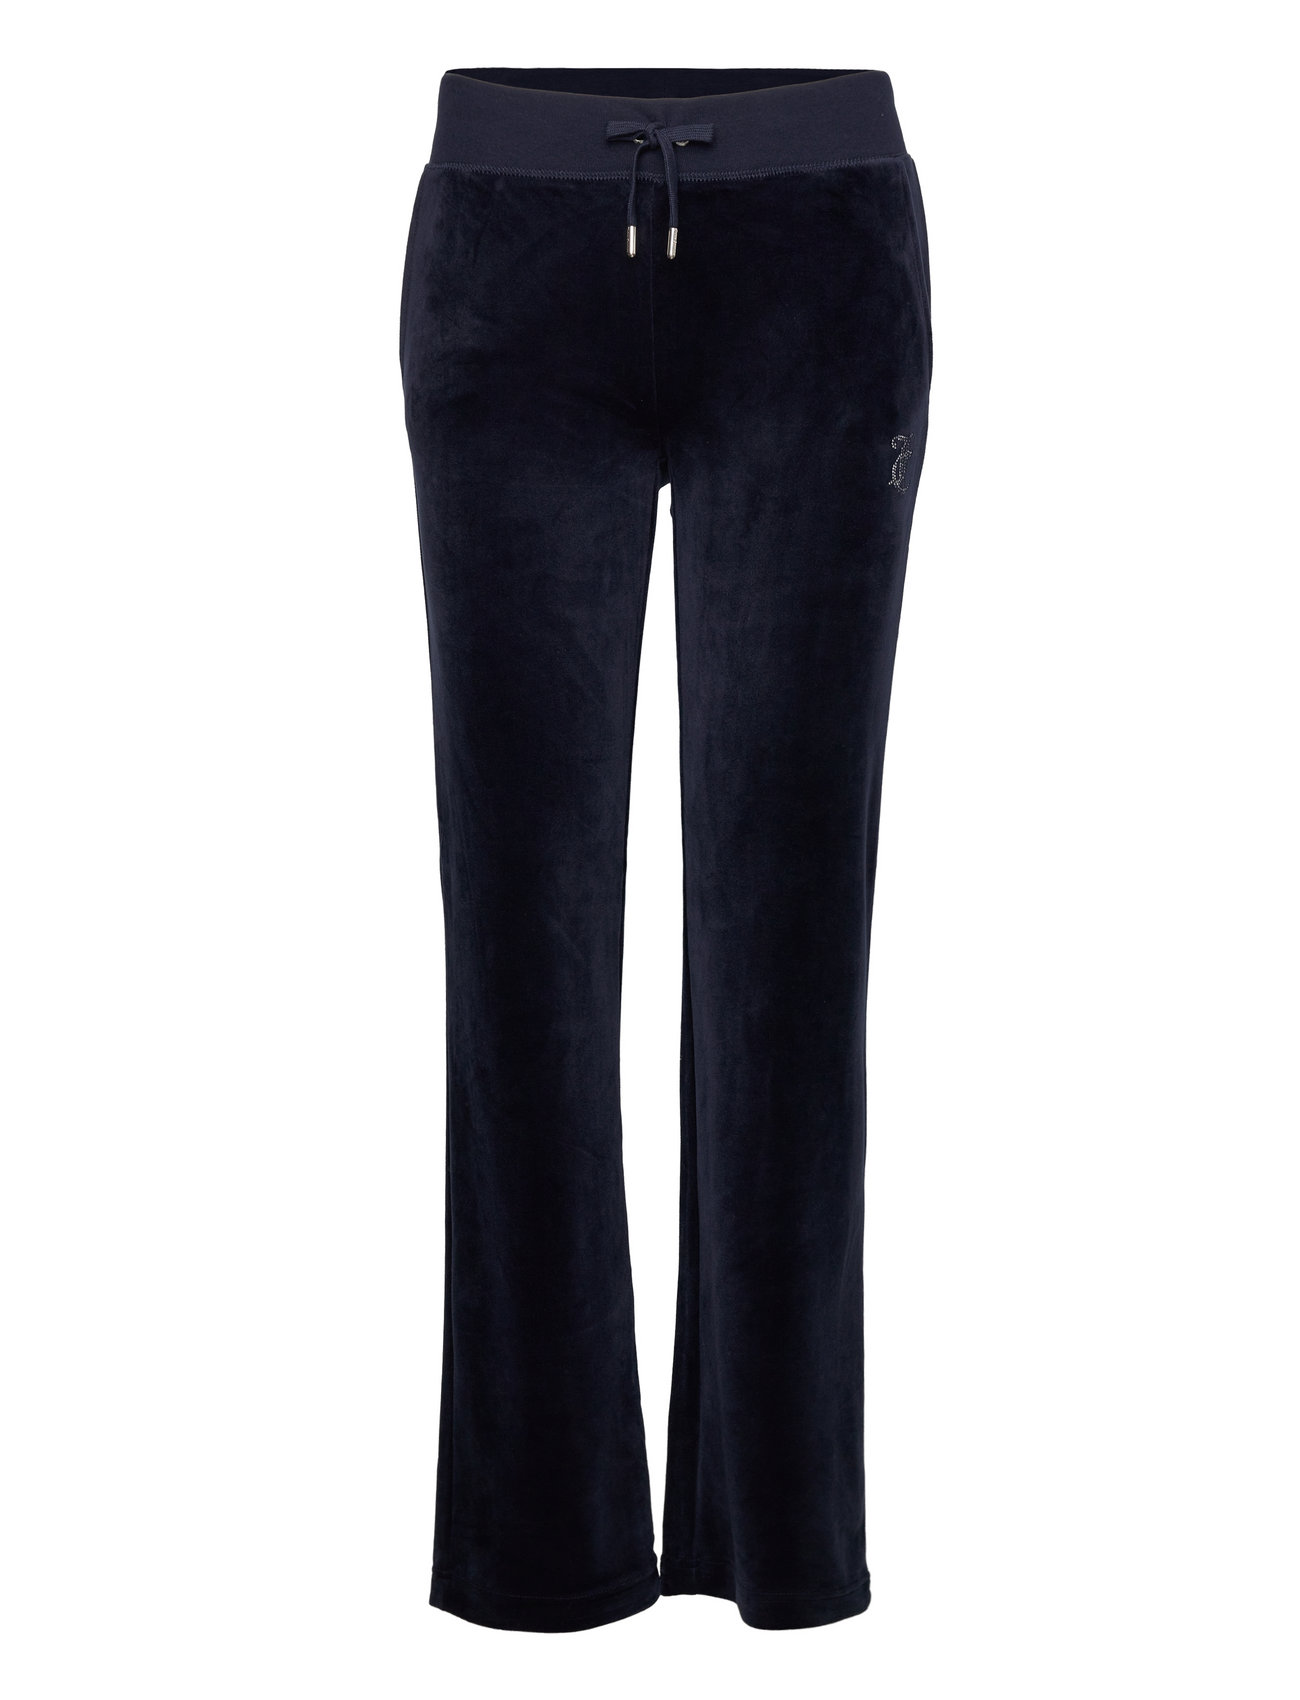 Juicy Couture Arched Diamante Del Ray Pant - Sweatpants 